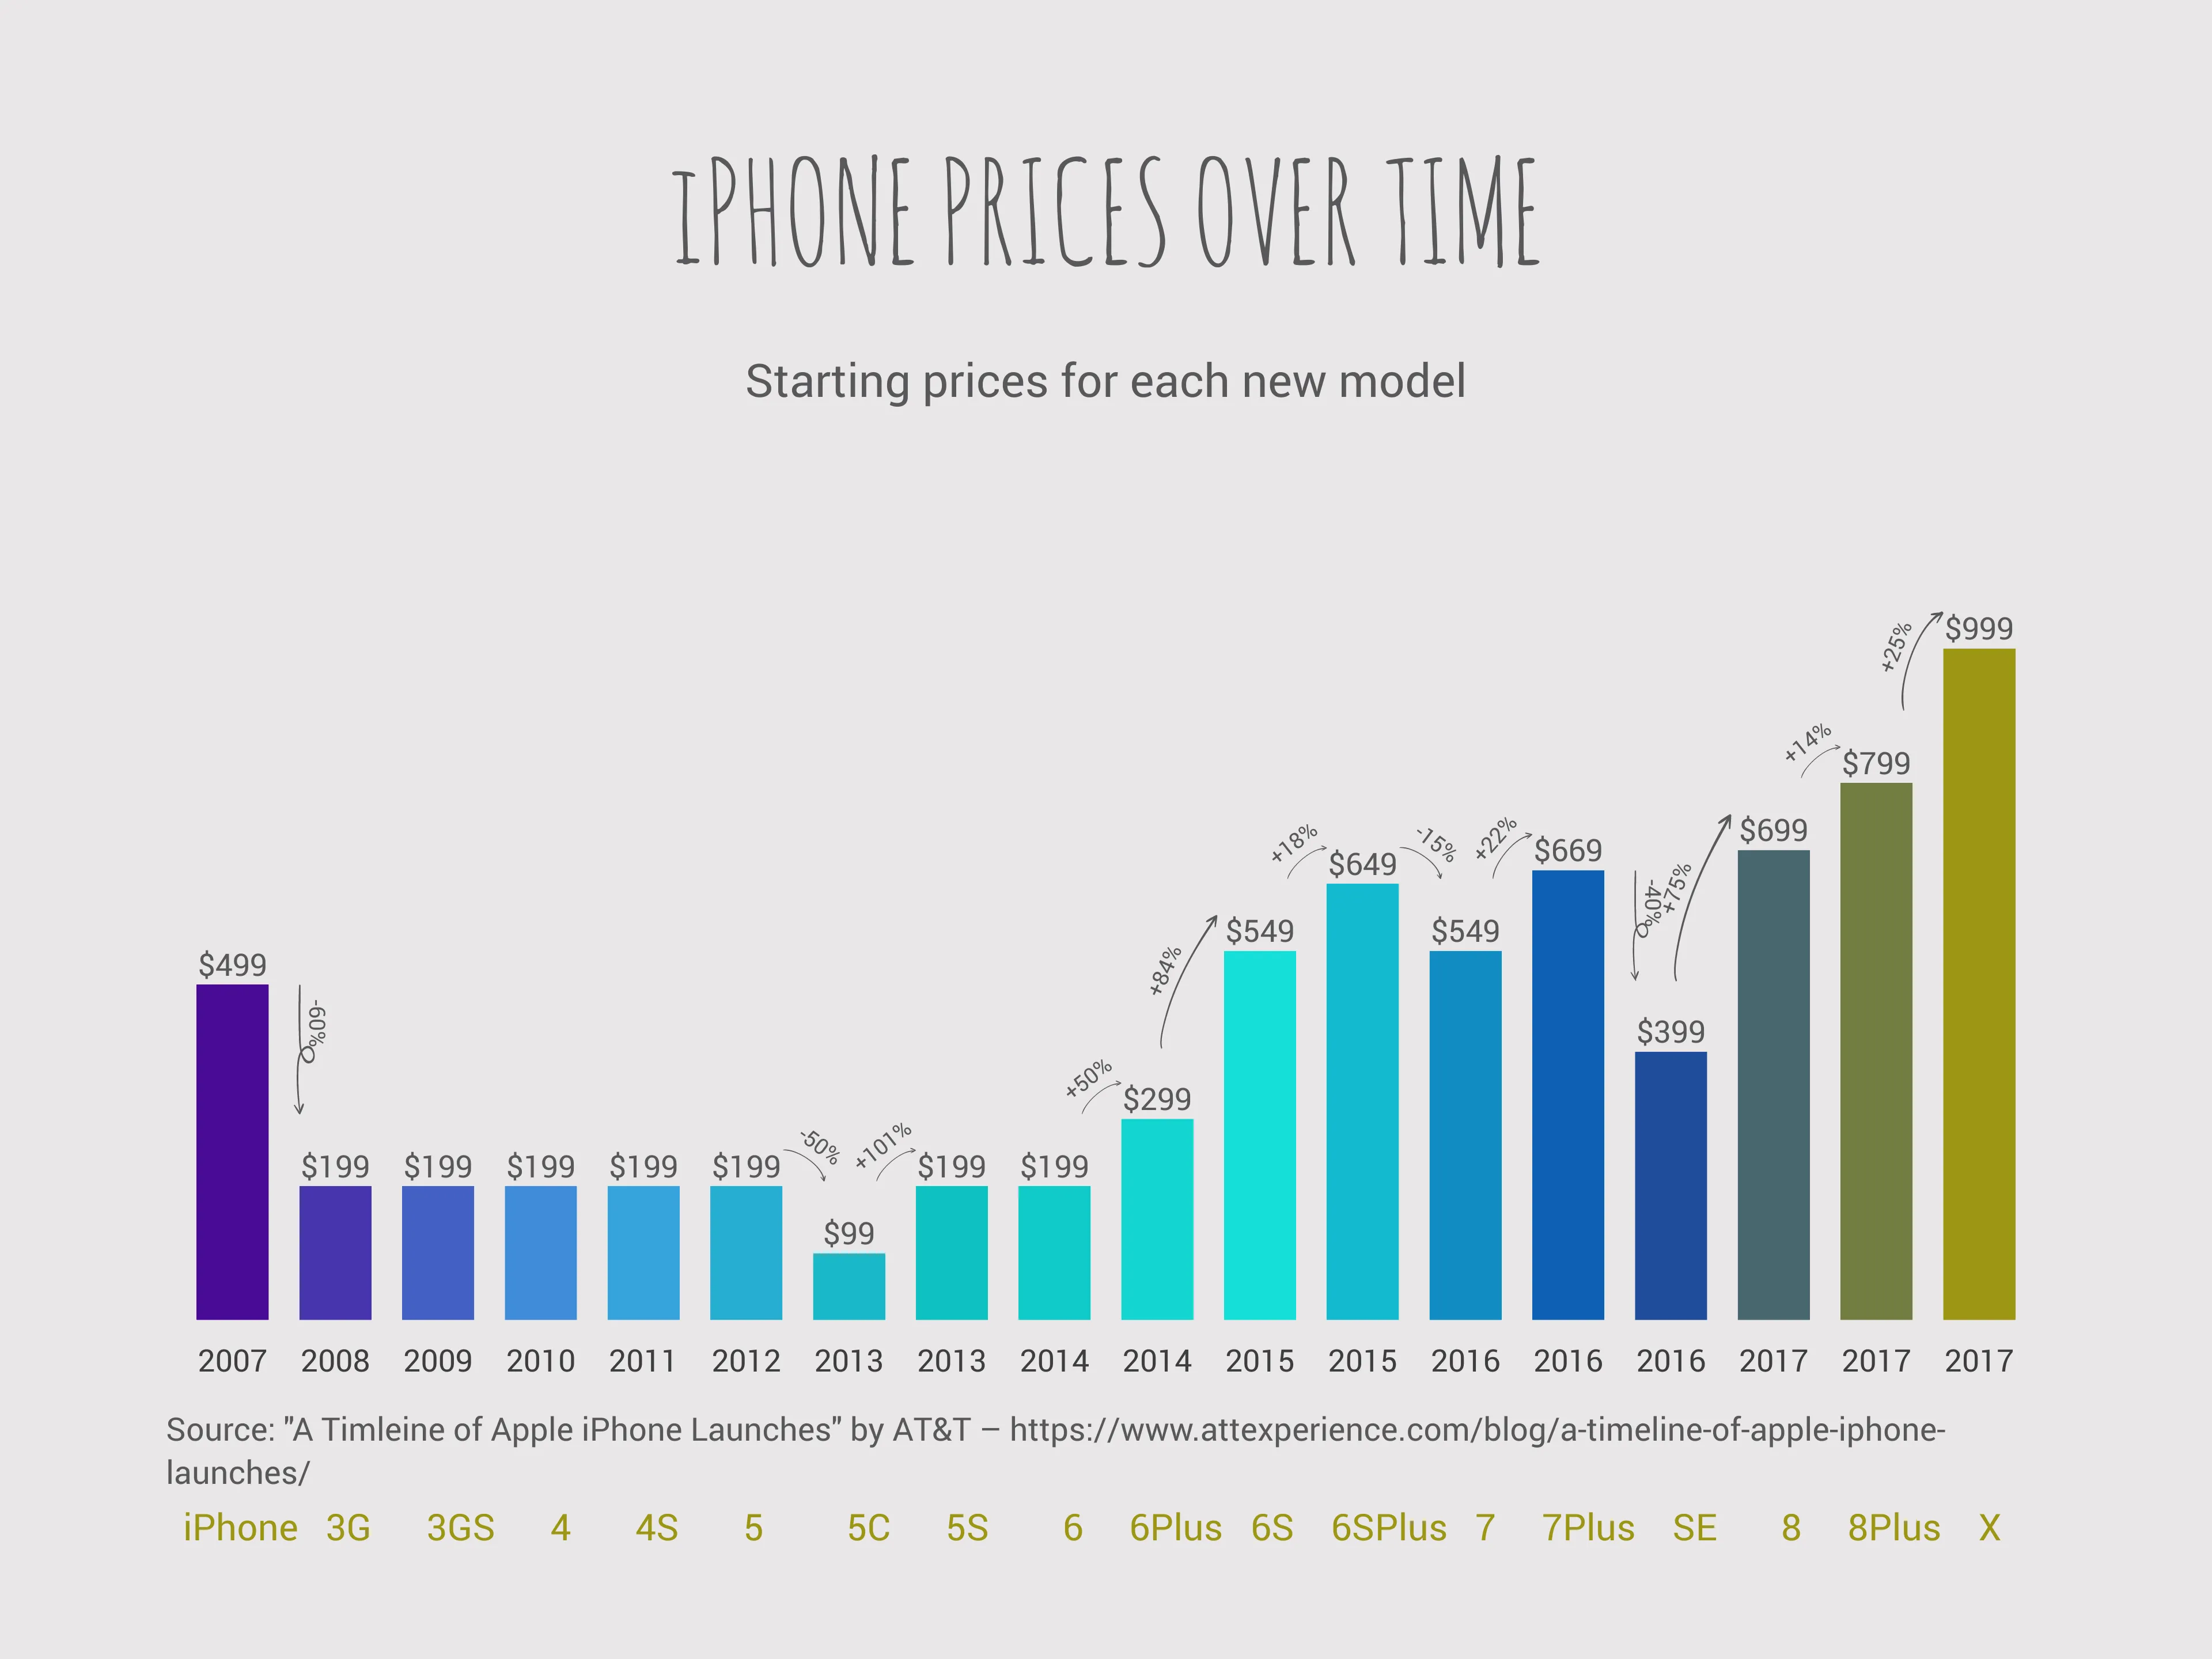 iPHONE PRICES OVER TIME